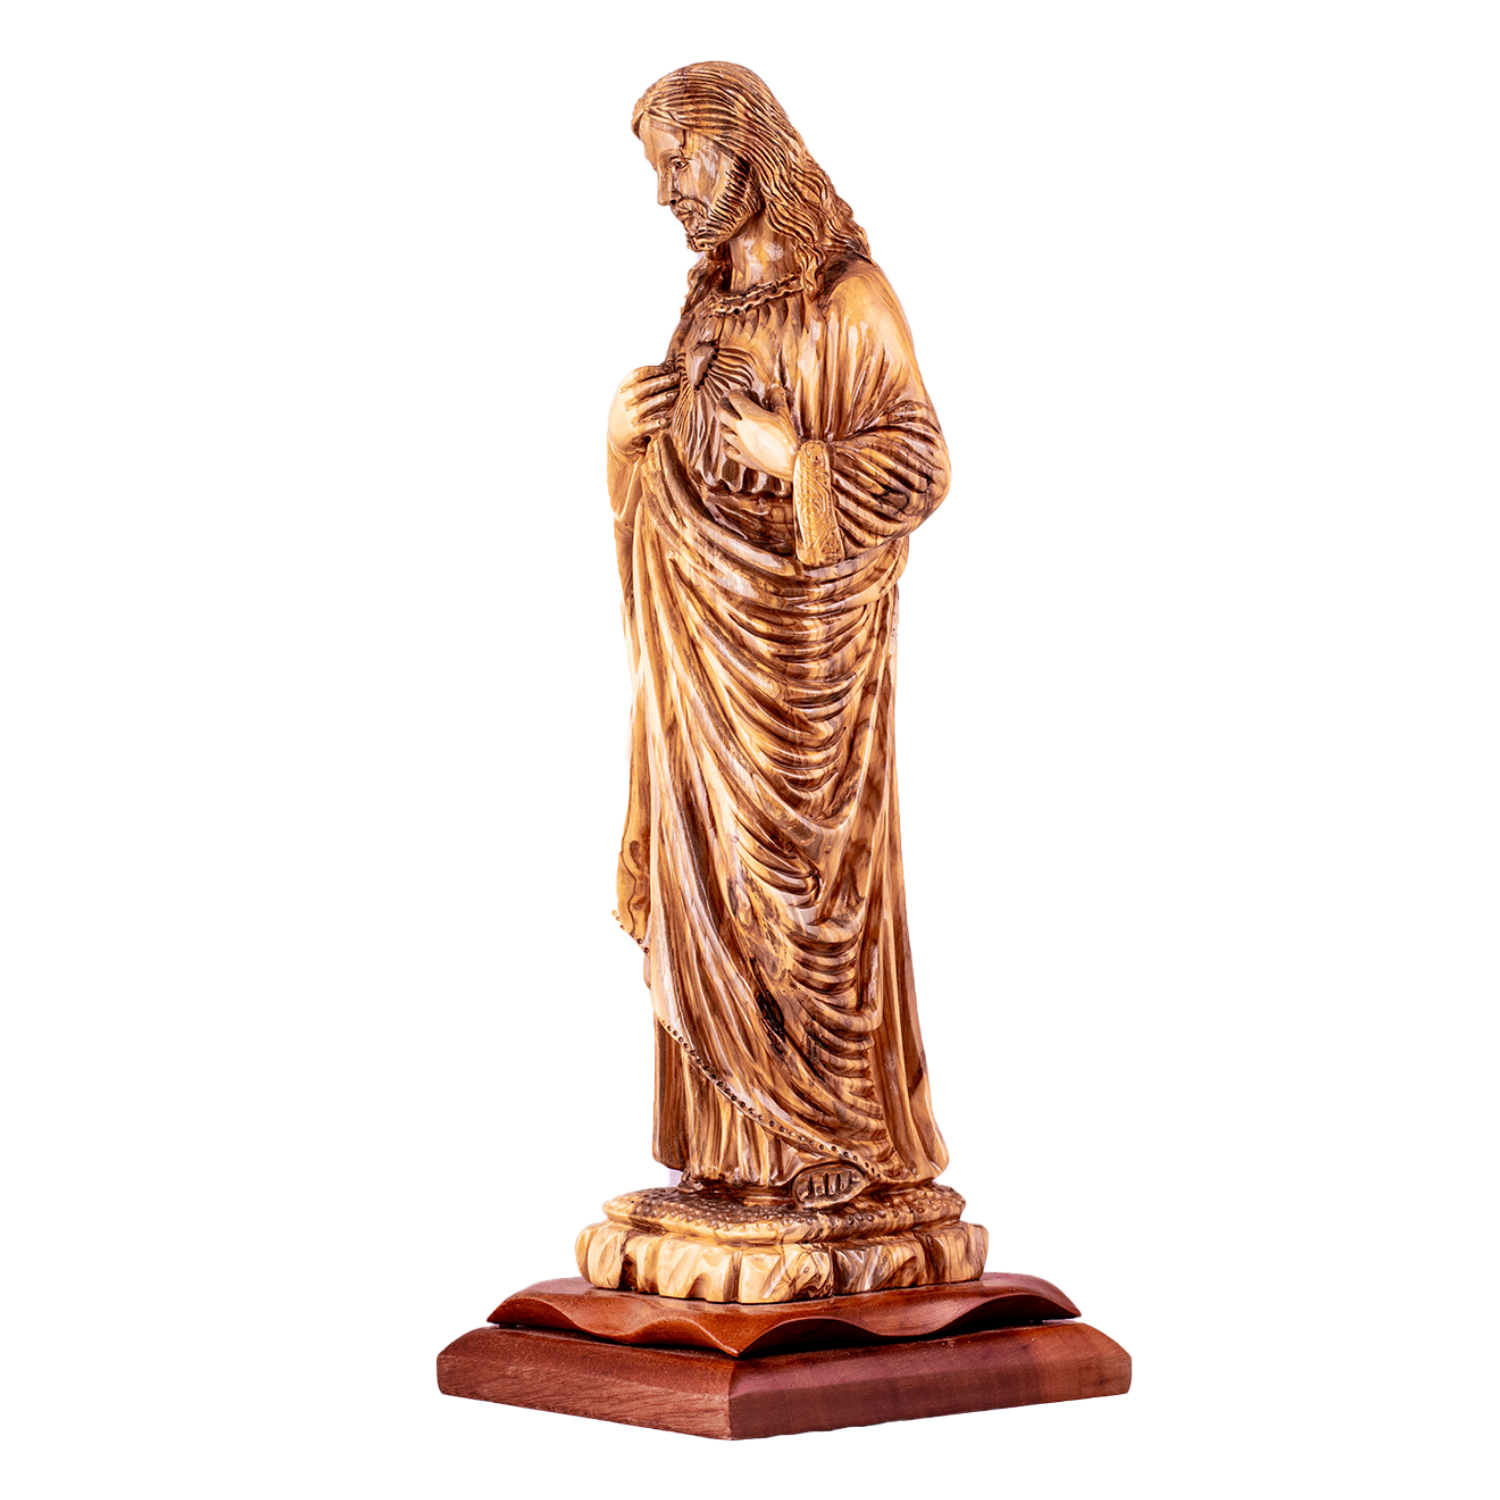 Sacred Heart of Jesus, Cathedral Quality, Size: 13.8"/35 cm Height